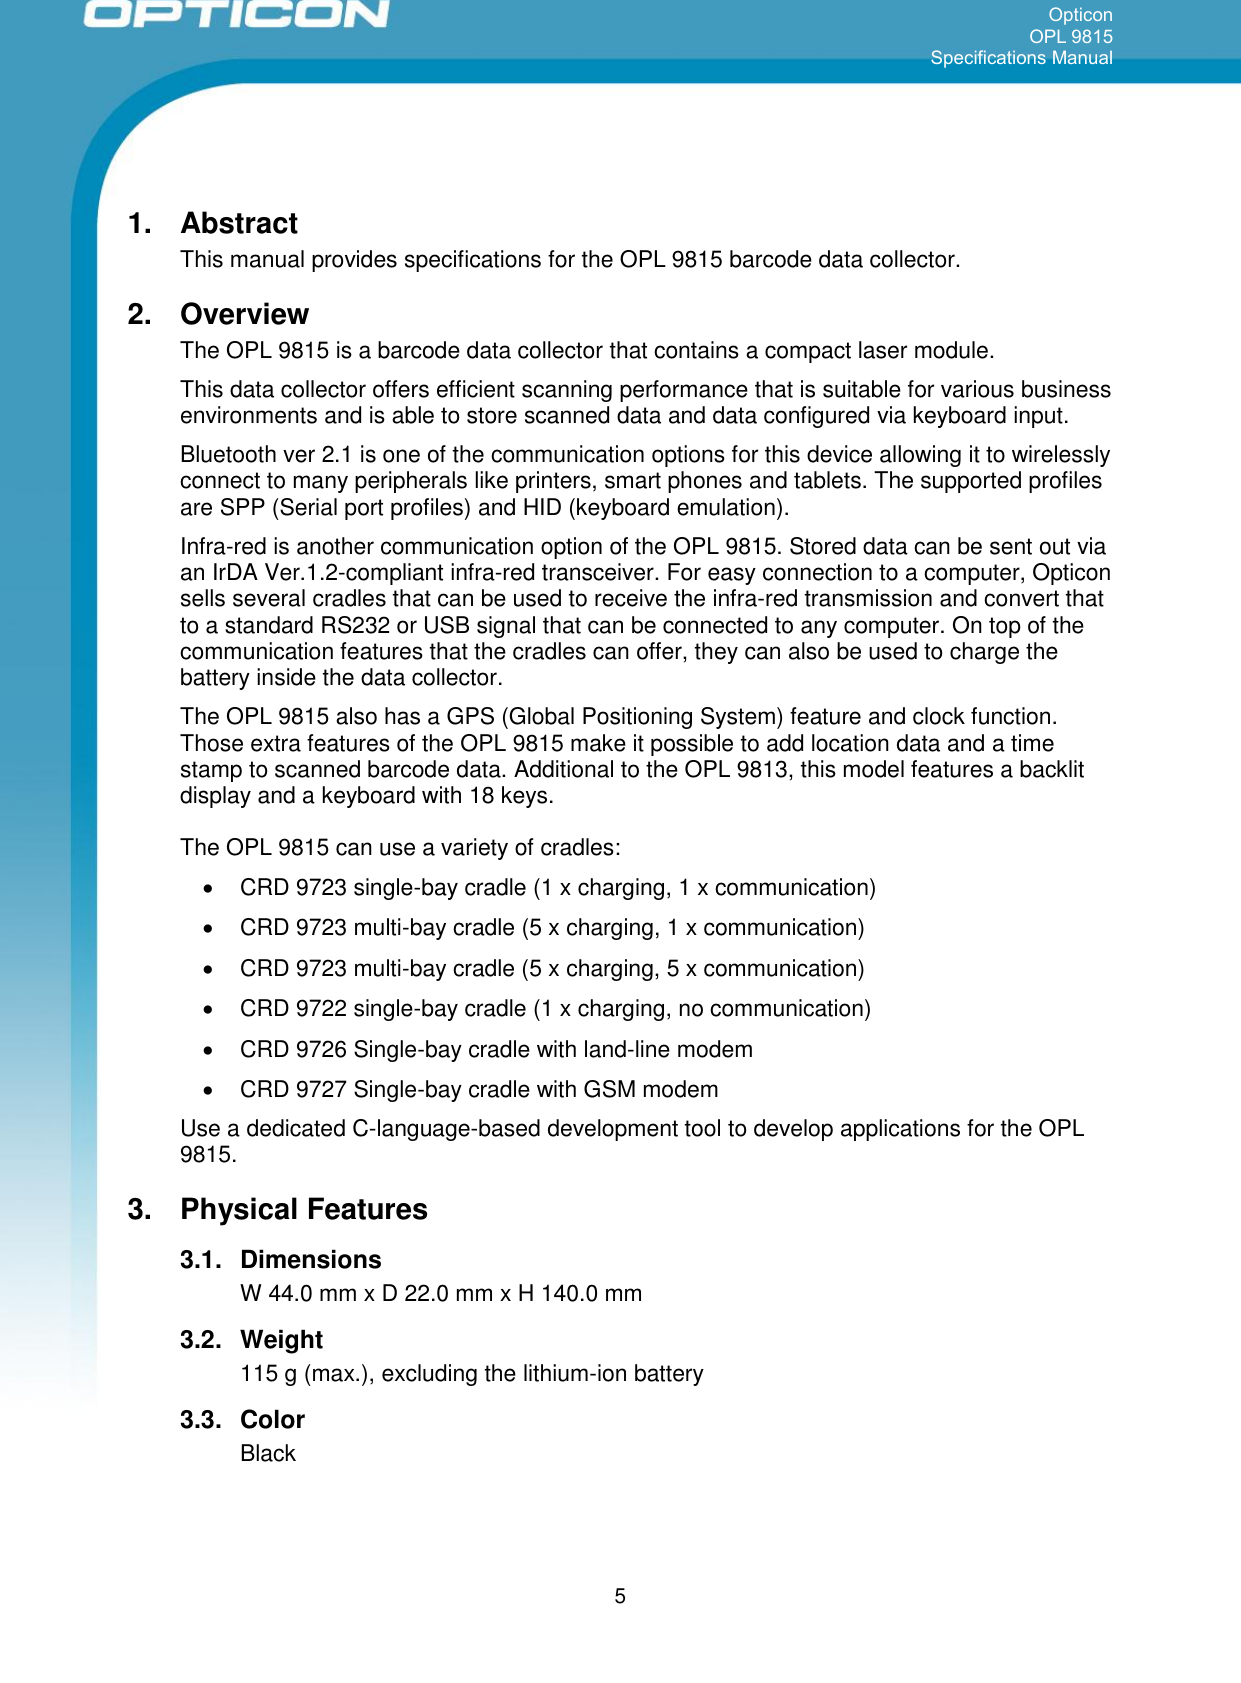 Opticon OPL 9815 Specifications Manual      5 1.  Abstract This manual provides specifications for the OPL 9815 barcode data collector. 2.  Overview The OPL 9815 is a barcode data collector that contains a compact laser module. This data collector offers efficient scanning performance that is suitable for various business environments and is able to store scanned data and data configured via keyboard input.  Bluetooth ver 2.1 is one of the communication options for this device allowing it to wirelessly connect to many peripherals like printers, smart phones and tablets. The supported profiles are SPP (Serial port profiles) and HID (keyboard emulation). Infra-red is another communication option of the OPL 9815. Stored data can be sent out via an IrDA Ver.1.2-compliant infra-red transceiver. For easy connection to a computer, Opticon sells several cradles that can be used to receive the infra-red transmission and convert that to a standard RS232 or USB signal that can be connected to any computer. On top of the communication features that the cradles can offer, they can also be used to charge the battery inside the data collector. The OPL 9815 also has a GPS (Global Positioning System) feature and clock function. Those extra features of the OPL 9815 make it possible to add location data and a time stamp to scanned barcode data. Additional to the OPL 9813, this model features a backlit display and a keyboard with 18 keys. The OPL 9815 can use a variety of cradles:   CRD 9723 single-bay cradle (1 x charging, 1 x communication)   CRD 9723 multi-bay cradle (5 x charging, 1 x communication)   CRD 9723 multi-bay cradle (5 x charging, 5 x communication)   CRD 9722 single-bay cradle (1 x charging, no communication)   CRD 9726 Single-bay cradle with land-line modem   CRD 9727 Single-bay cradle with GSM modem Use a dedicated C-language-based development tool to develop applications for the OPL 9815. 3.  Physical Features 3.1.  Dimensions W 44.0 mm x D 22.0 mm x H 140.0 mm 3.2.  Weight 115 g (max.), excluding the lithium-ion battery 3.3.  Color Black 